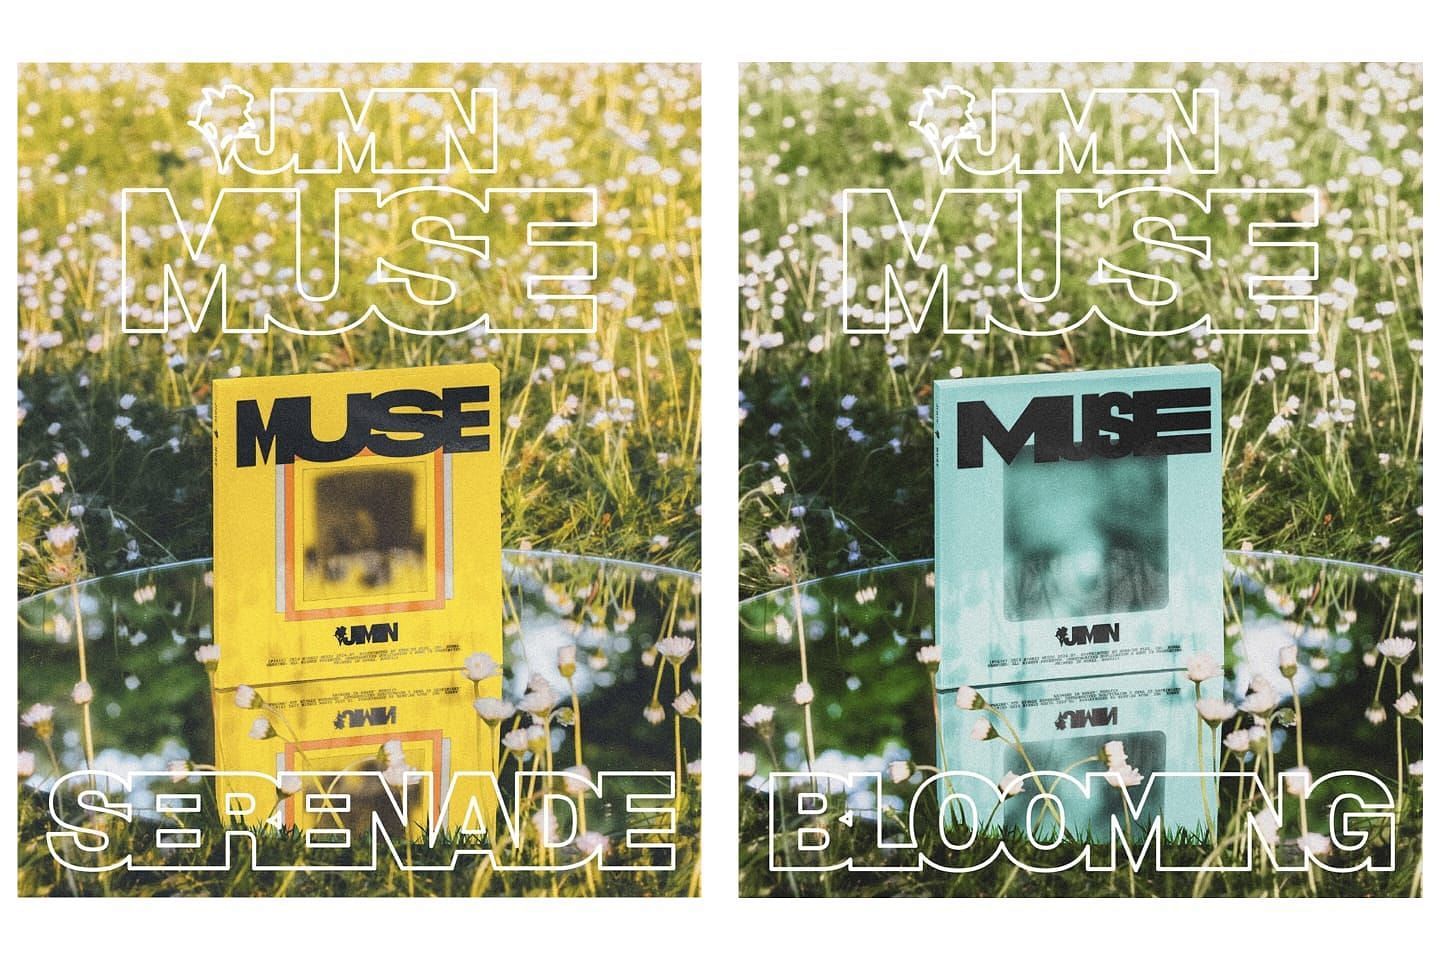  Fans ecstatic over BTS&rsquo; Jimin&rsquo;s Muse album cover designs, &lsquo;Blooming&rsquo; and &lsquo;Serenade&rsquo; (Image via Weverse)